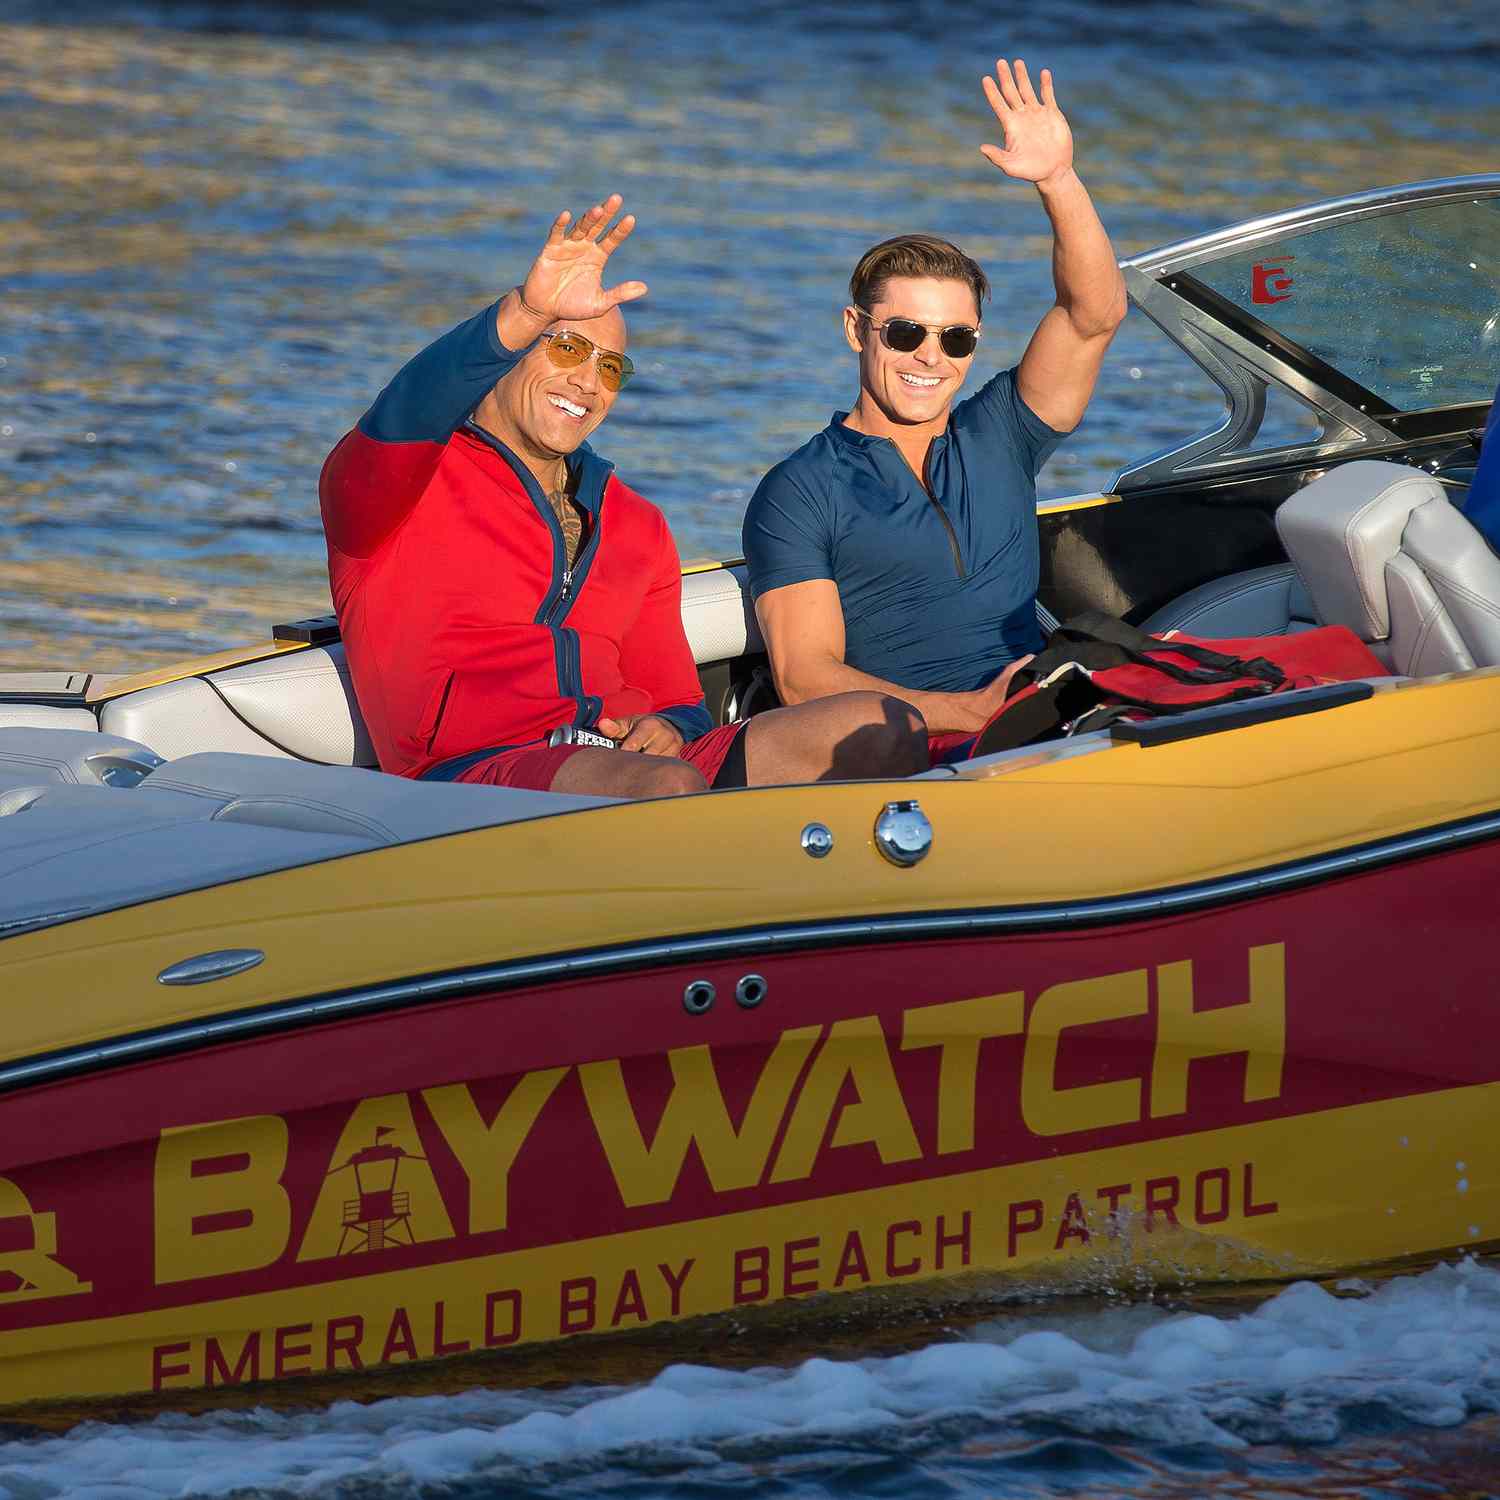 The Camera Suddenly Caught The Moment The Rock And Zac Efron Start Lifeguard Duty As Cameras Start Rolling On Baywatch Movie In Florida – The Rock